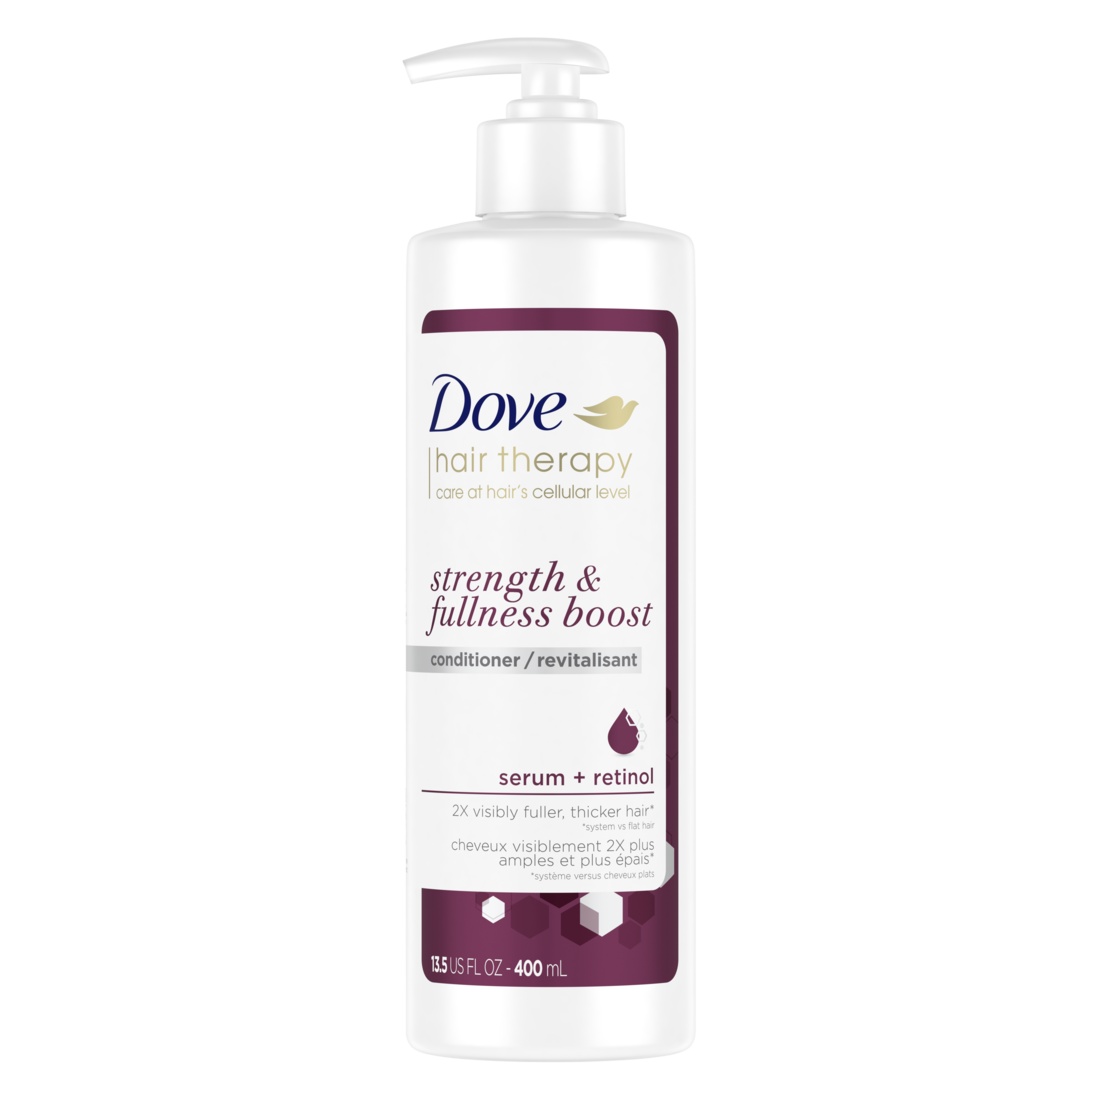 Dove Hair Therapy Strength & Fullness Boost Conditioner 400mL